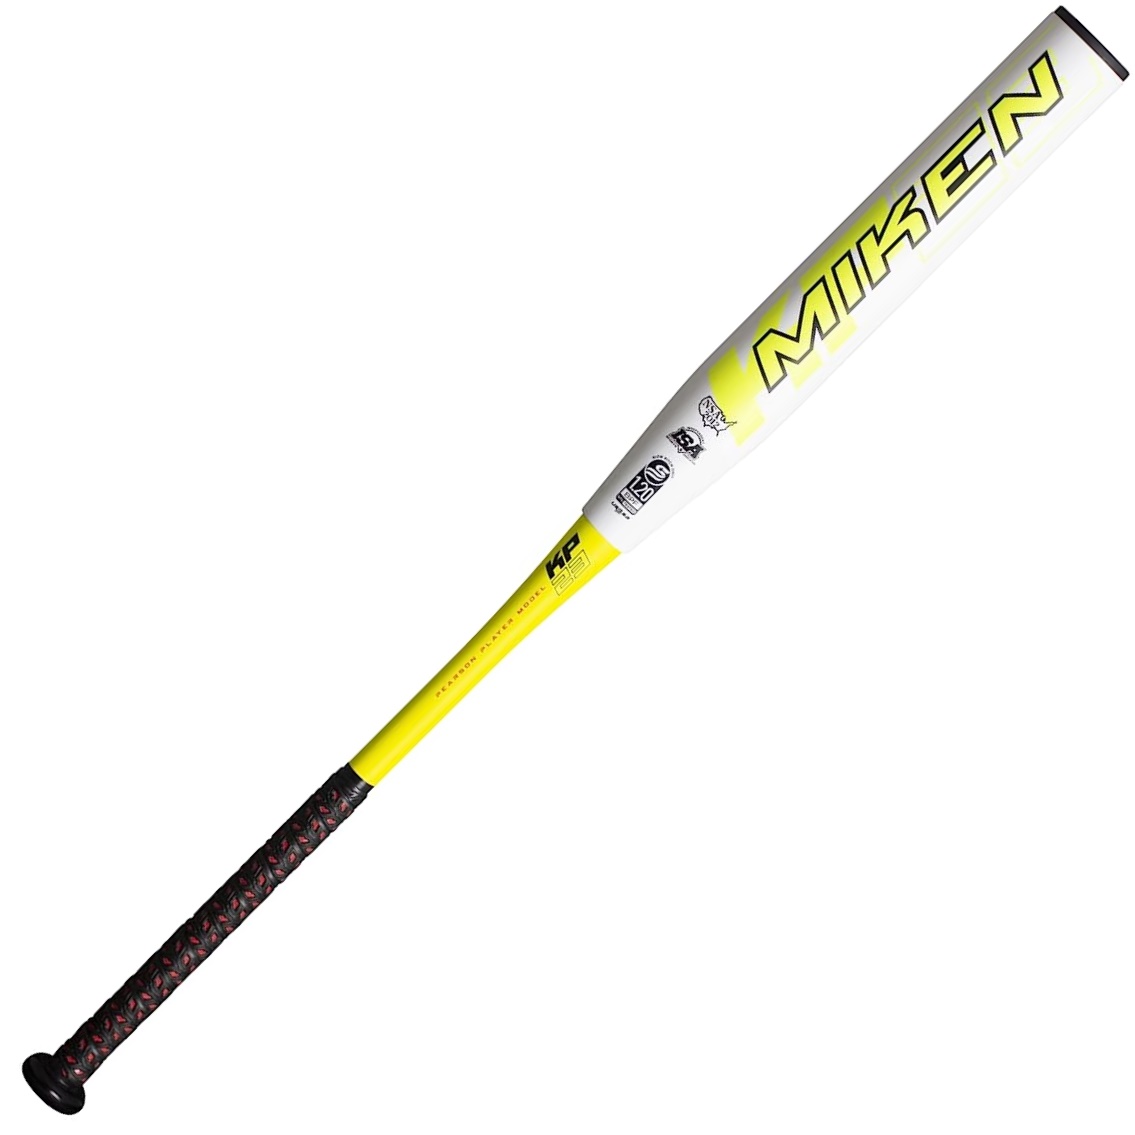 The Miken USSSA Freak Pearson Freak 23 Slowpitch Softball Bat is the perfect choice for adults who enjoy playing recreational or competitive slowpitch softball. This bat is designed with cutting-edge technology and features that are sure to enhance your performance on the field. One of the key features of this bat is the F4P Handle Technology, which improves handle-to-barrel energy transfer, resulting in maximum performance. With a 12 barrel, players can expect maximum barrel control and a generous sweetspot for improved accuracy and power. The bat is made from exclusive premium grade C-4 proprietary Carbon Fiber, which maximizes the composite layup and provides unmatched performance and consistency. The XL Reload Swing Weight, with a .5 oz. end load, provides added pop, making it easier to drive the ball further. Whether you're playing in a USSSA, ISA, or NSA league, you can rest assured that this bat is approved for play, ensuring that you'll be able to make the most of your game day after day. If you're looking for a top-of-the-line slowpitch softball bat, the Miken USSSA Freak Pearson Freak 23 is an excellent choice!